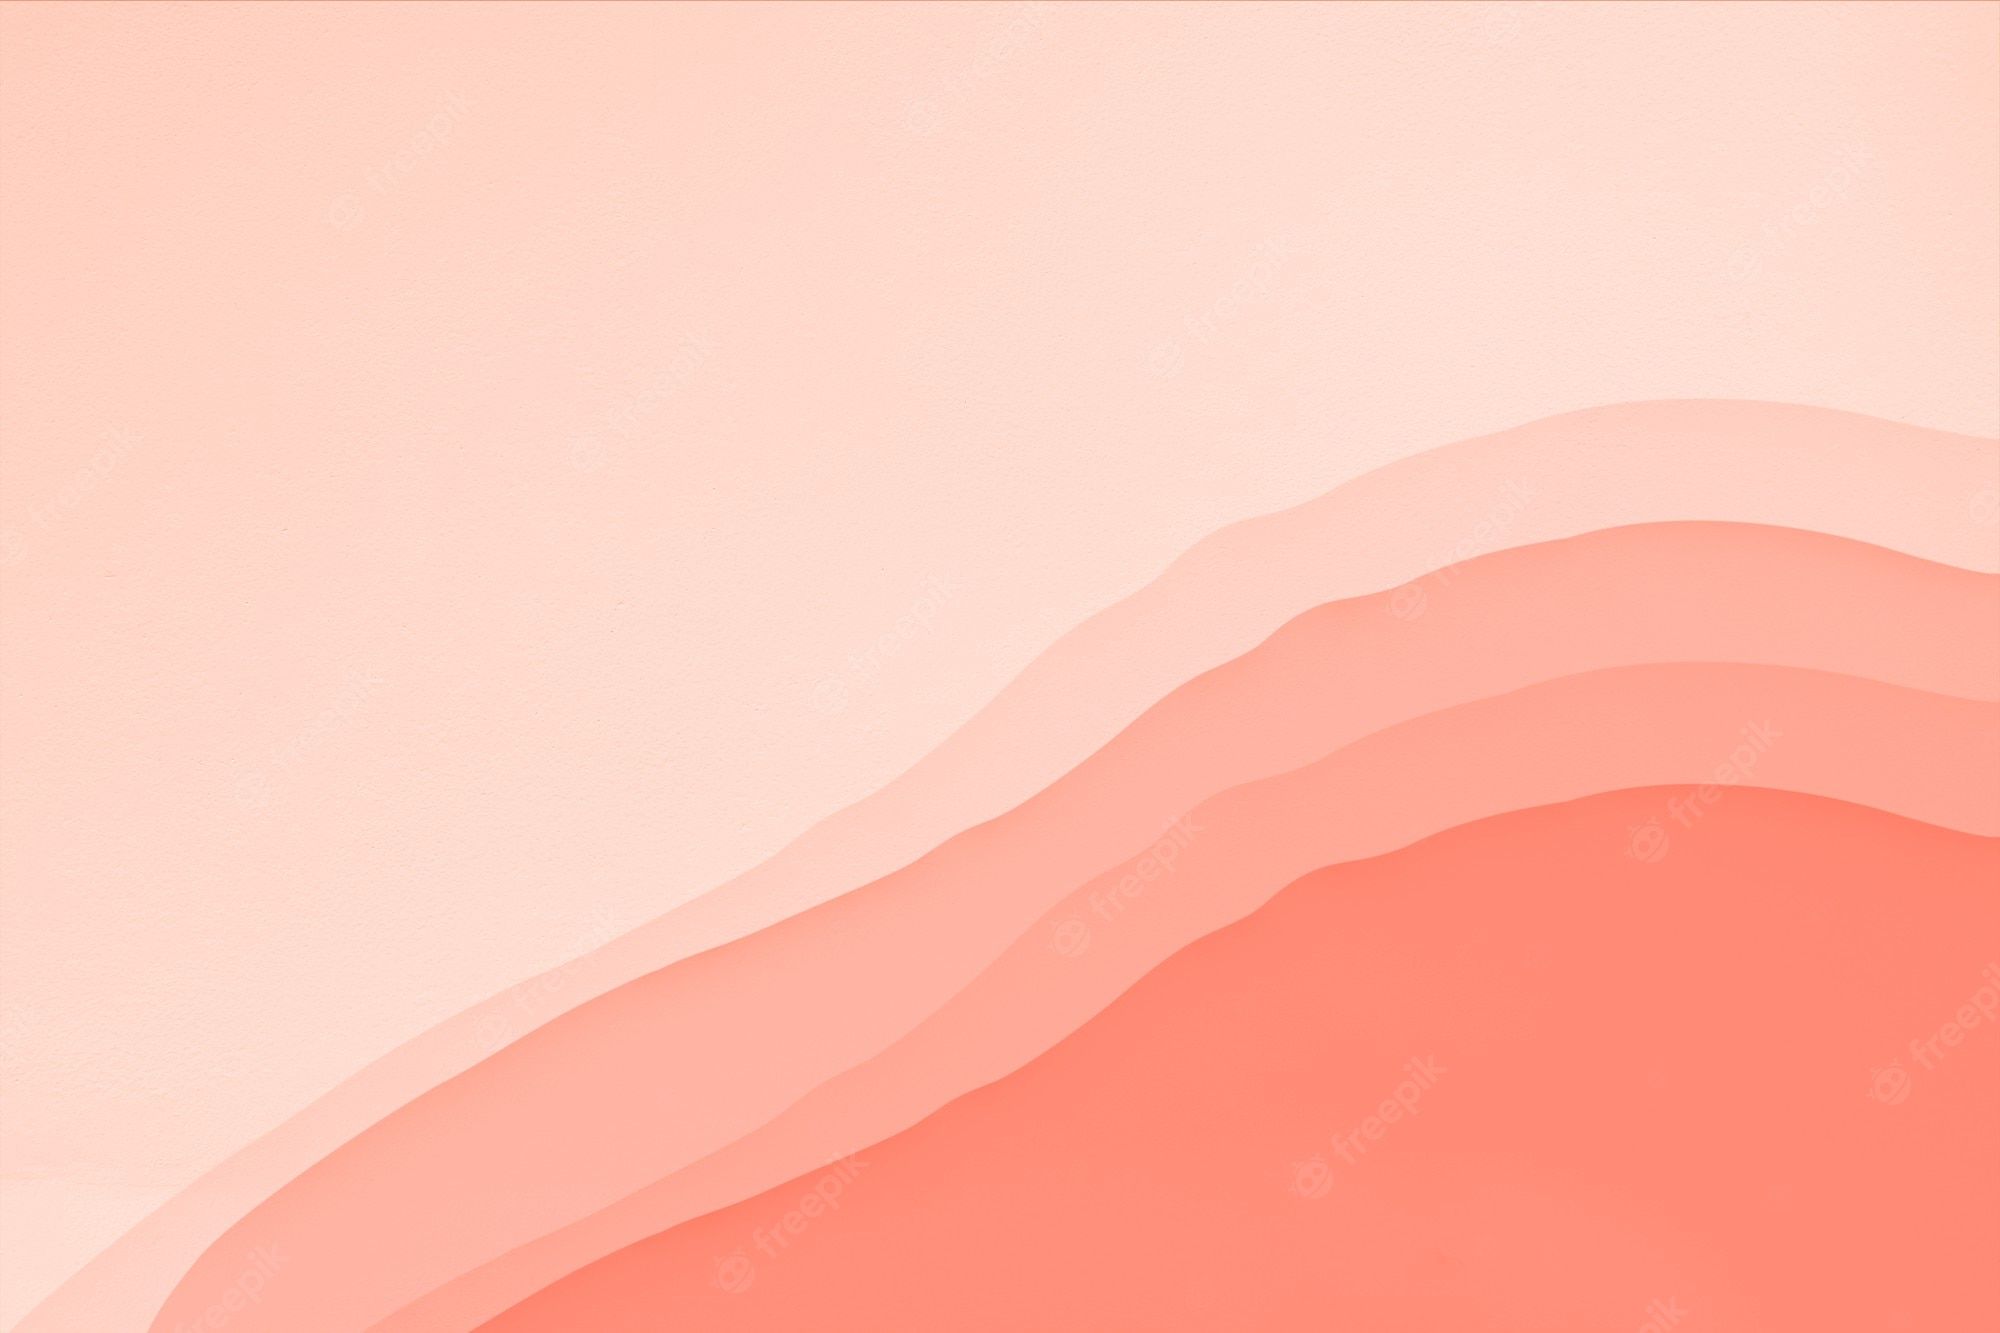 A graphic with a gradient of pink and orange with a texture of sand dunes - Coral